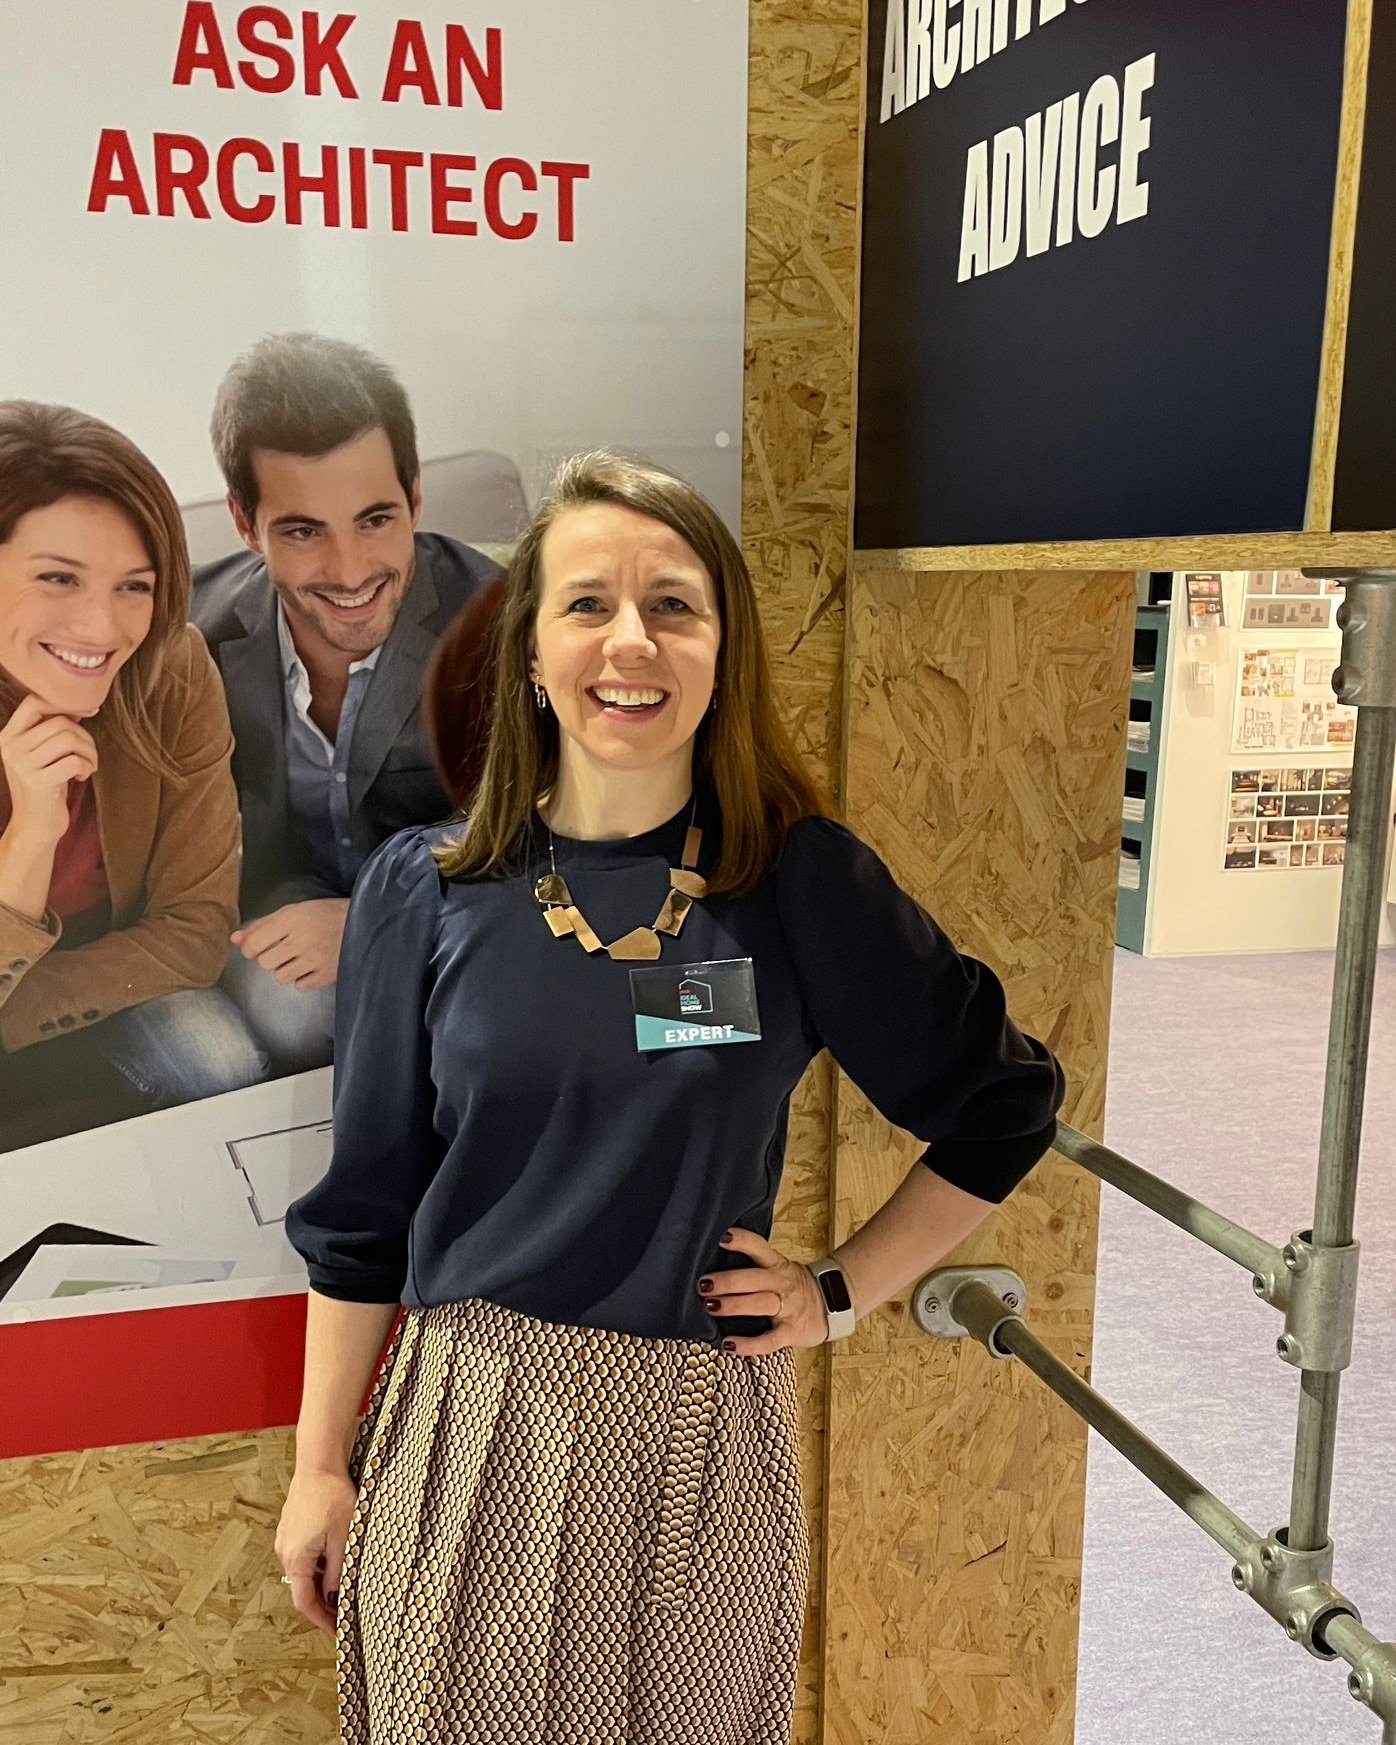 On Saturday and Sunday I had the pleasure of working at the Ask an Expert hub at the Ideal Home Show in the RDS. 

I got to meet people from all over the country and answer their questions on their current and future builds/renovations. 

A lot of pe